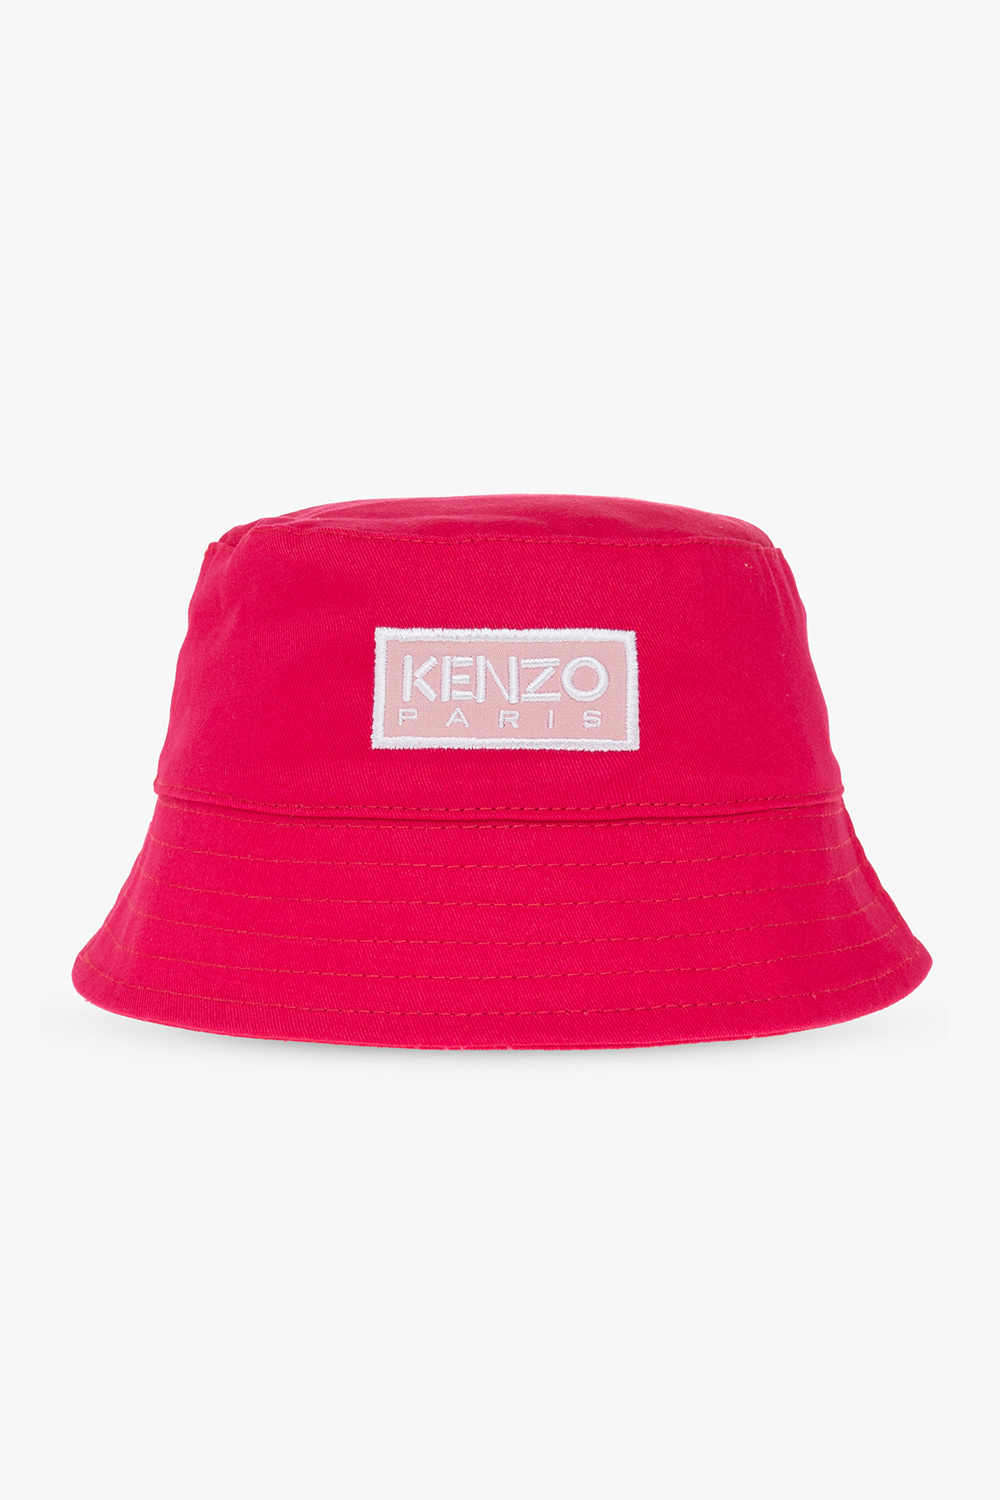 Playboy Bucket Hat - Hot Pink - One Size